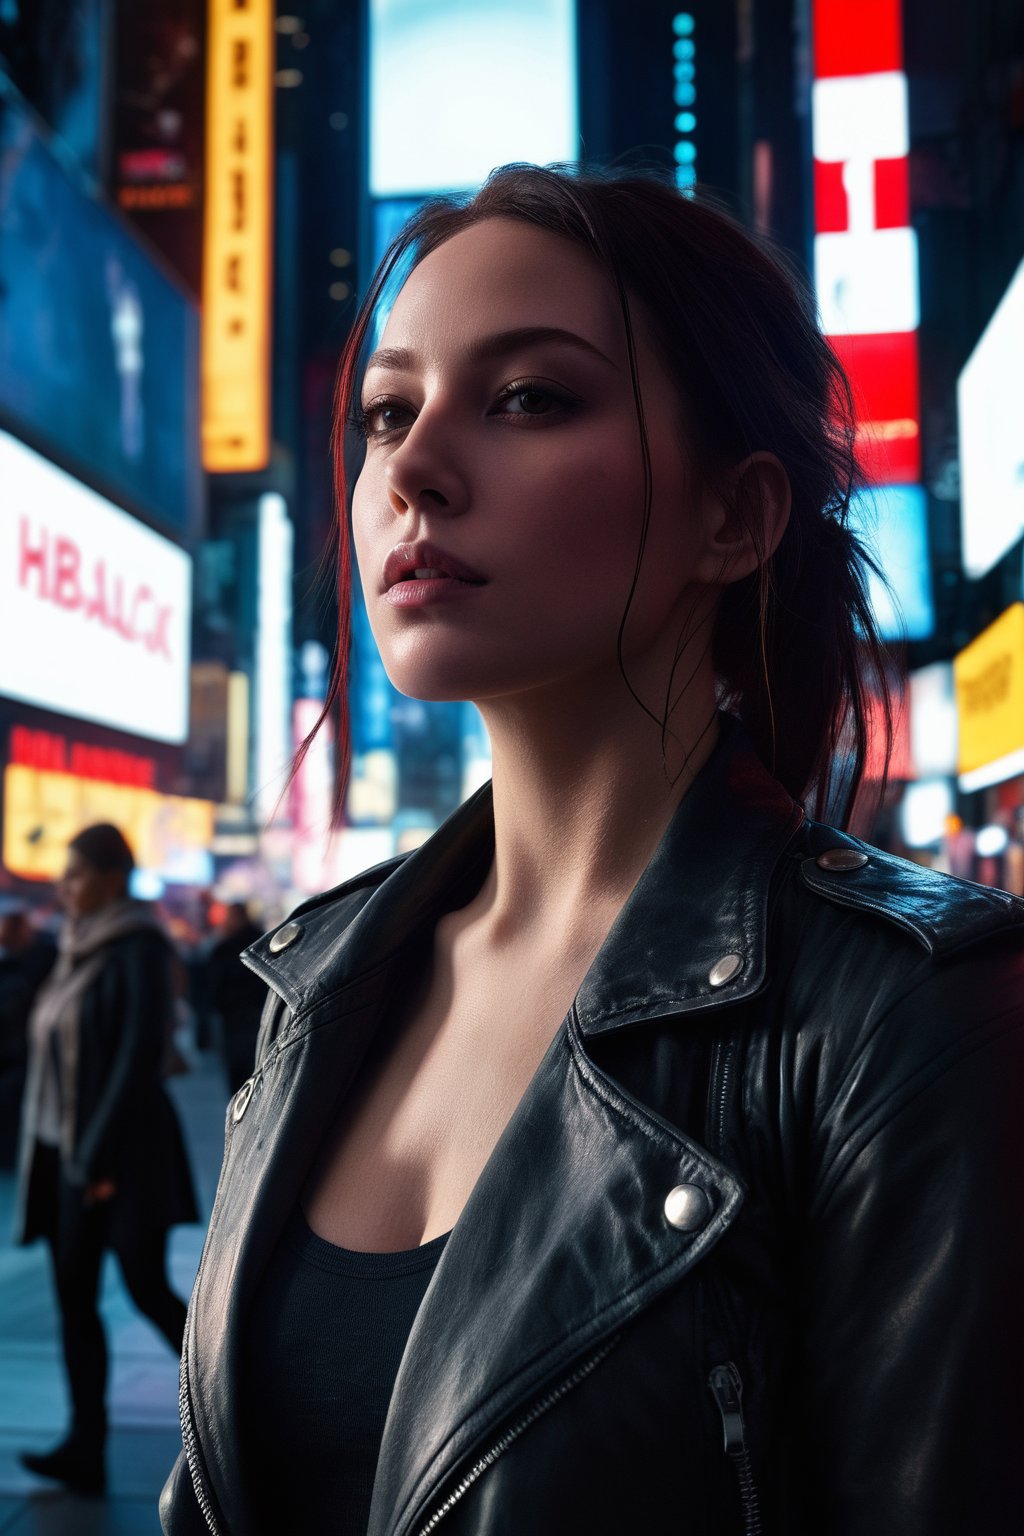 (ultra realistic,best quality),photorealistic,Extremely Realistic, in depth, cinematic light,hubgwomen,hubg_beauty_girl,

1 female detailed face time square detailed background cyberpunk shadow dramatic lighting by Bill Sienkiewicz,

intricate background, realism,realistic,raw,analog,portrait,photorealistic